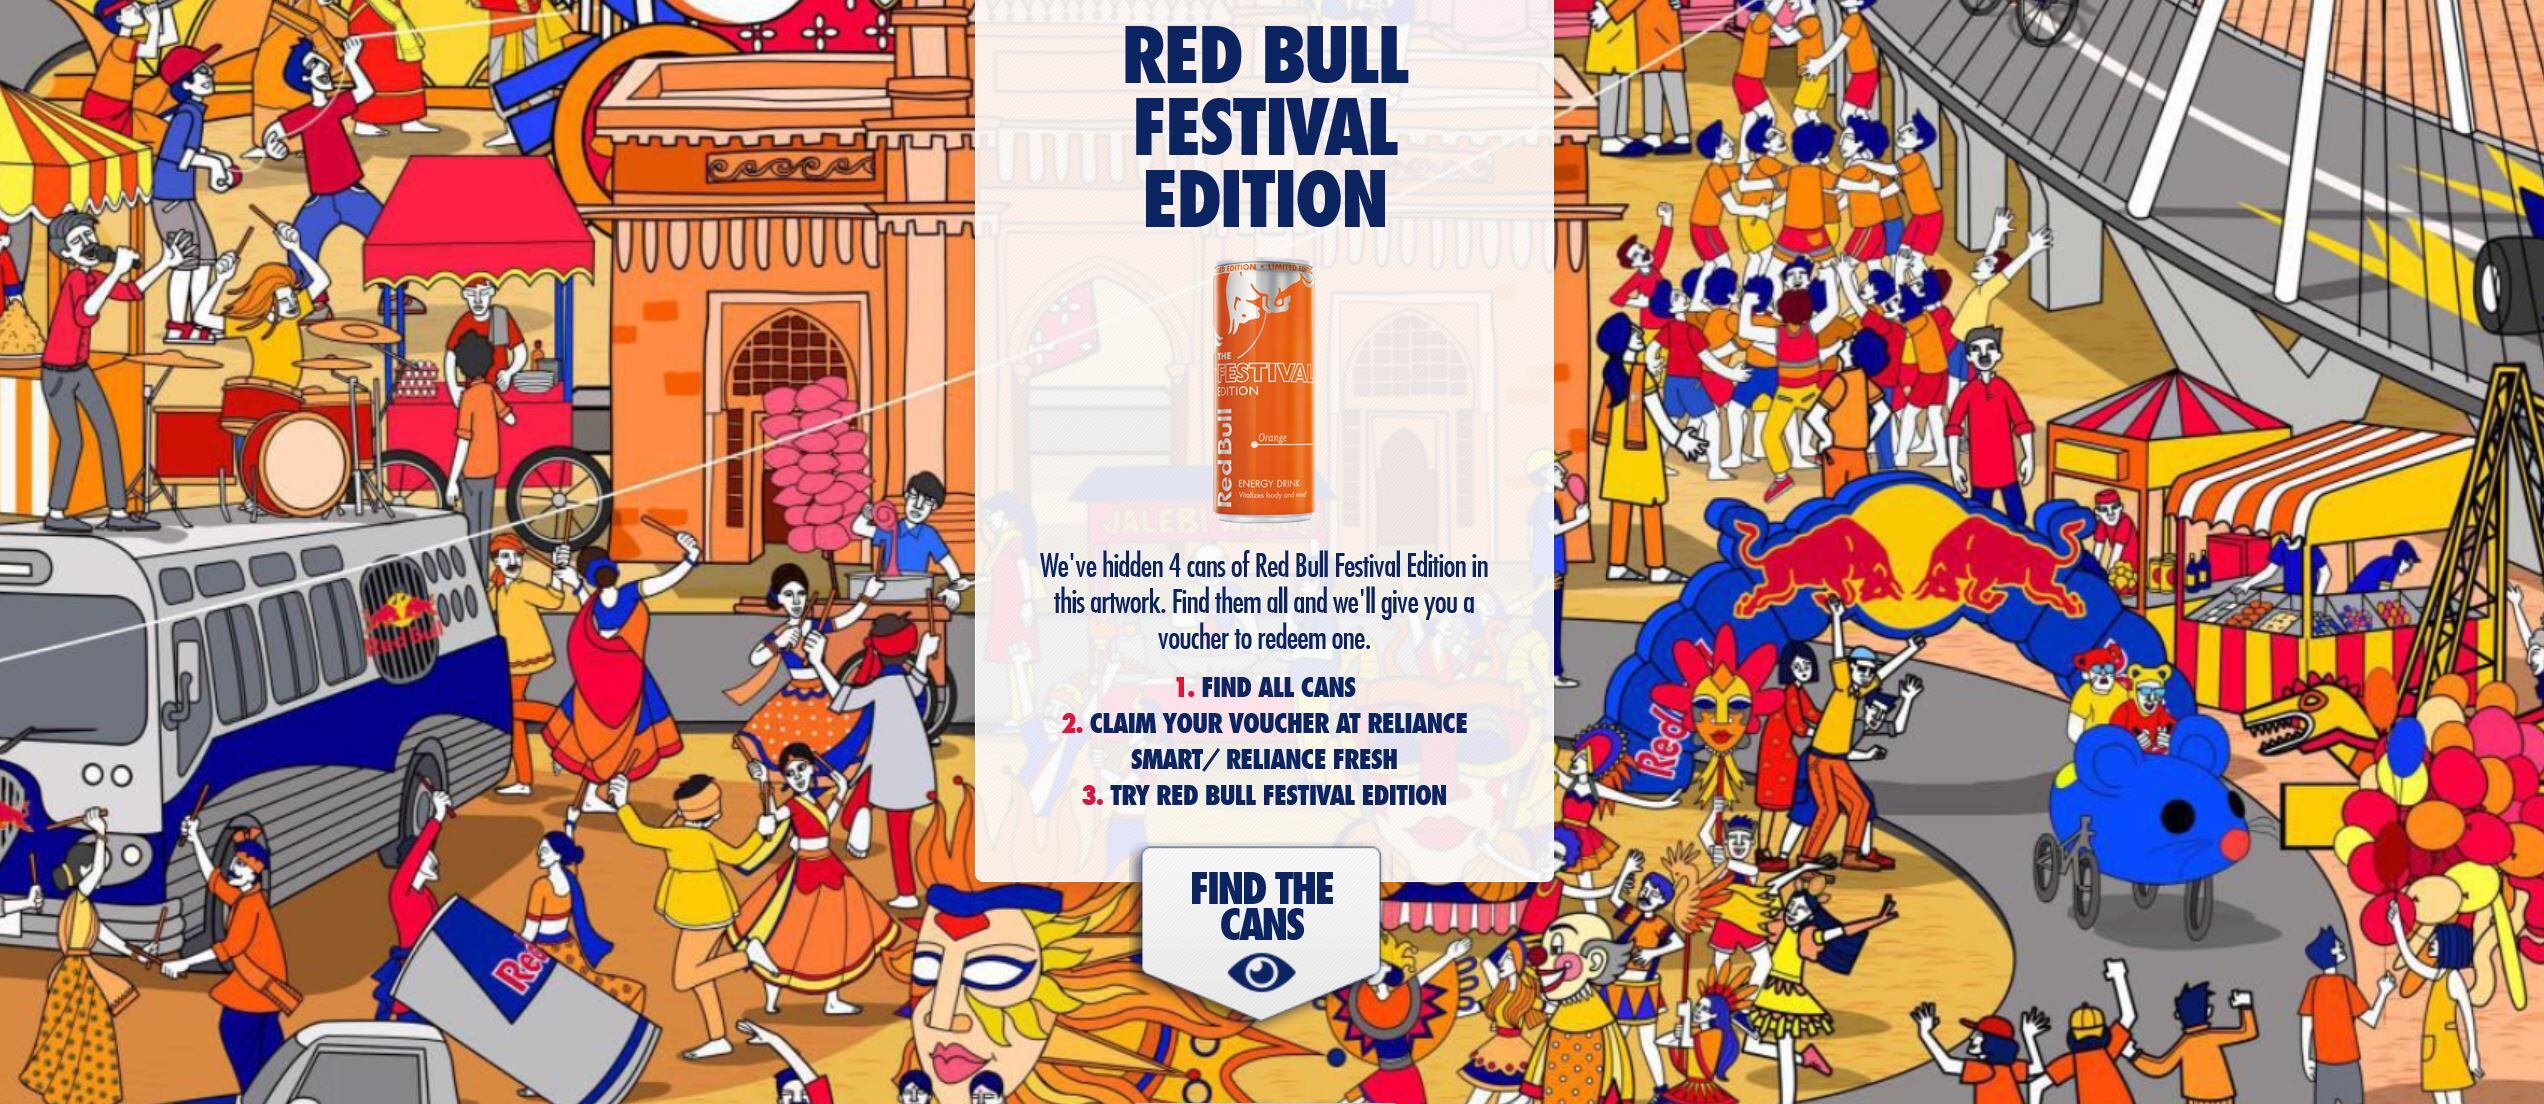 Red Bull India launches New Festival Edition With Orange Flavor